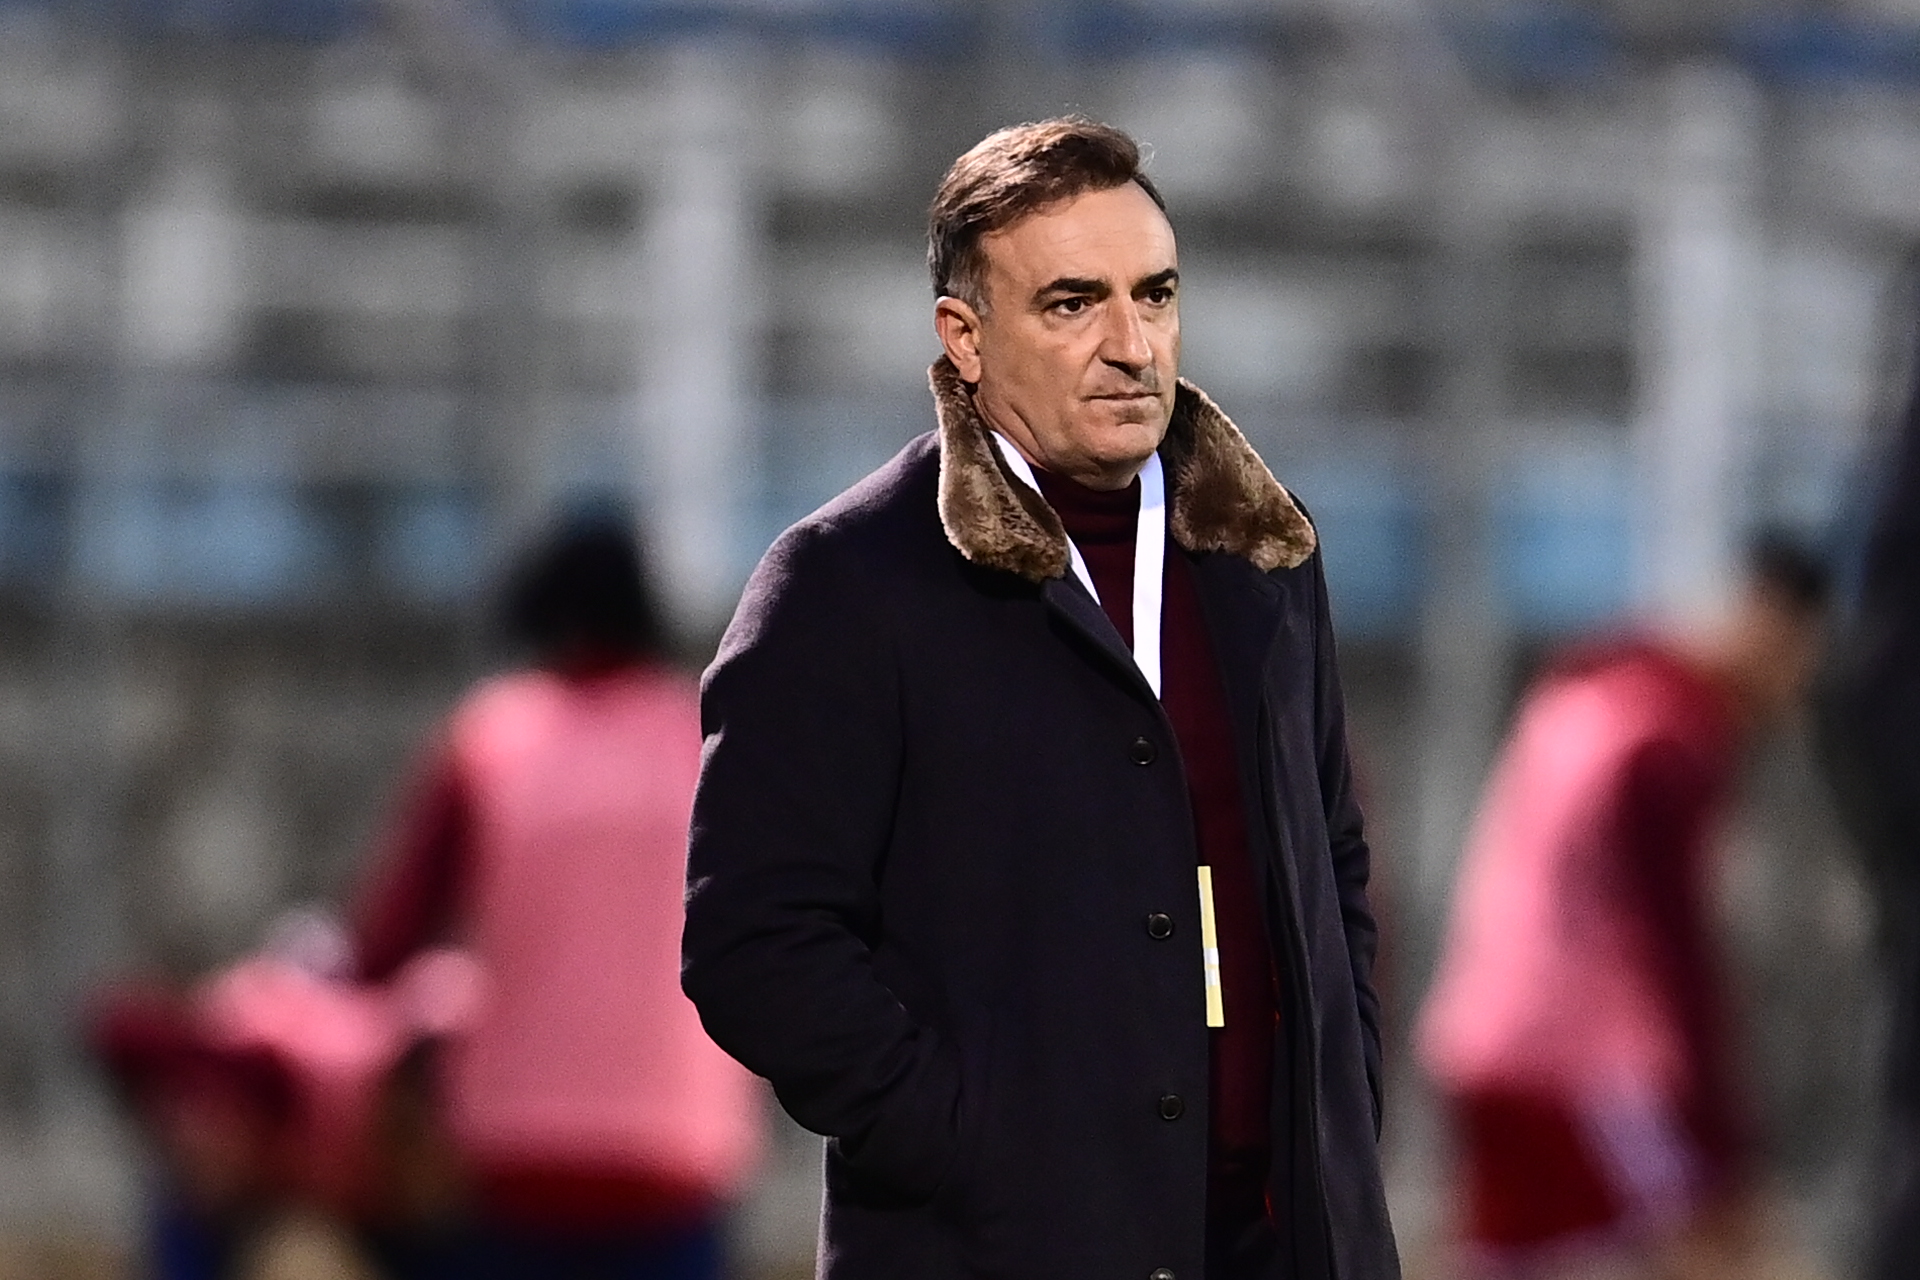 Carlos Carvalhal: “Let this be a lesson to us”